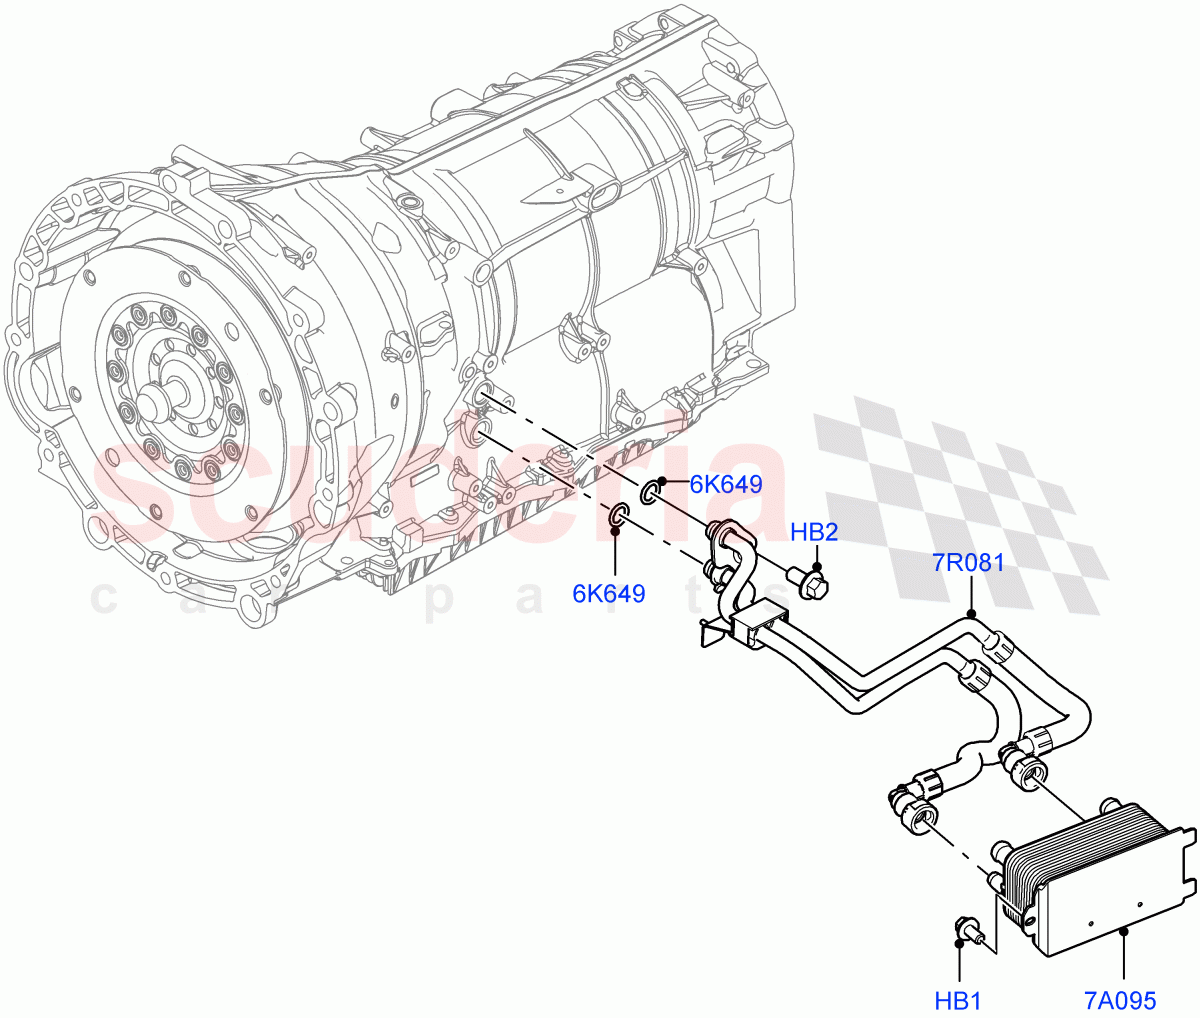 Transmission Cooling Systems(Nitra Plant Build)(3.0L AJ20P6 Petrol High,8 Speed Auto Trans ZF 8HP76,3.0L AJ20D6 Diesel High) of Land Rover Land Rover Discovery 5 (2017+) [2.0 Turbo Diesel]